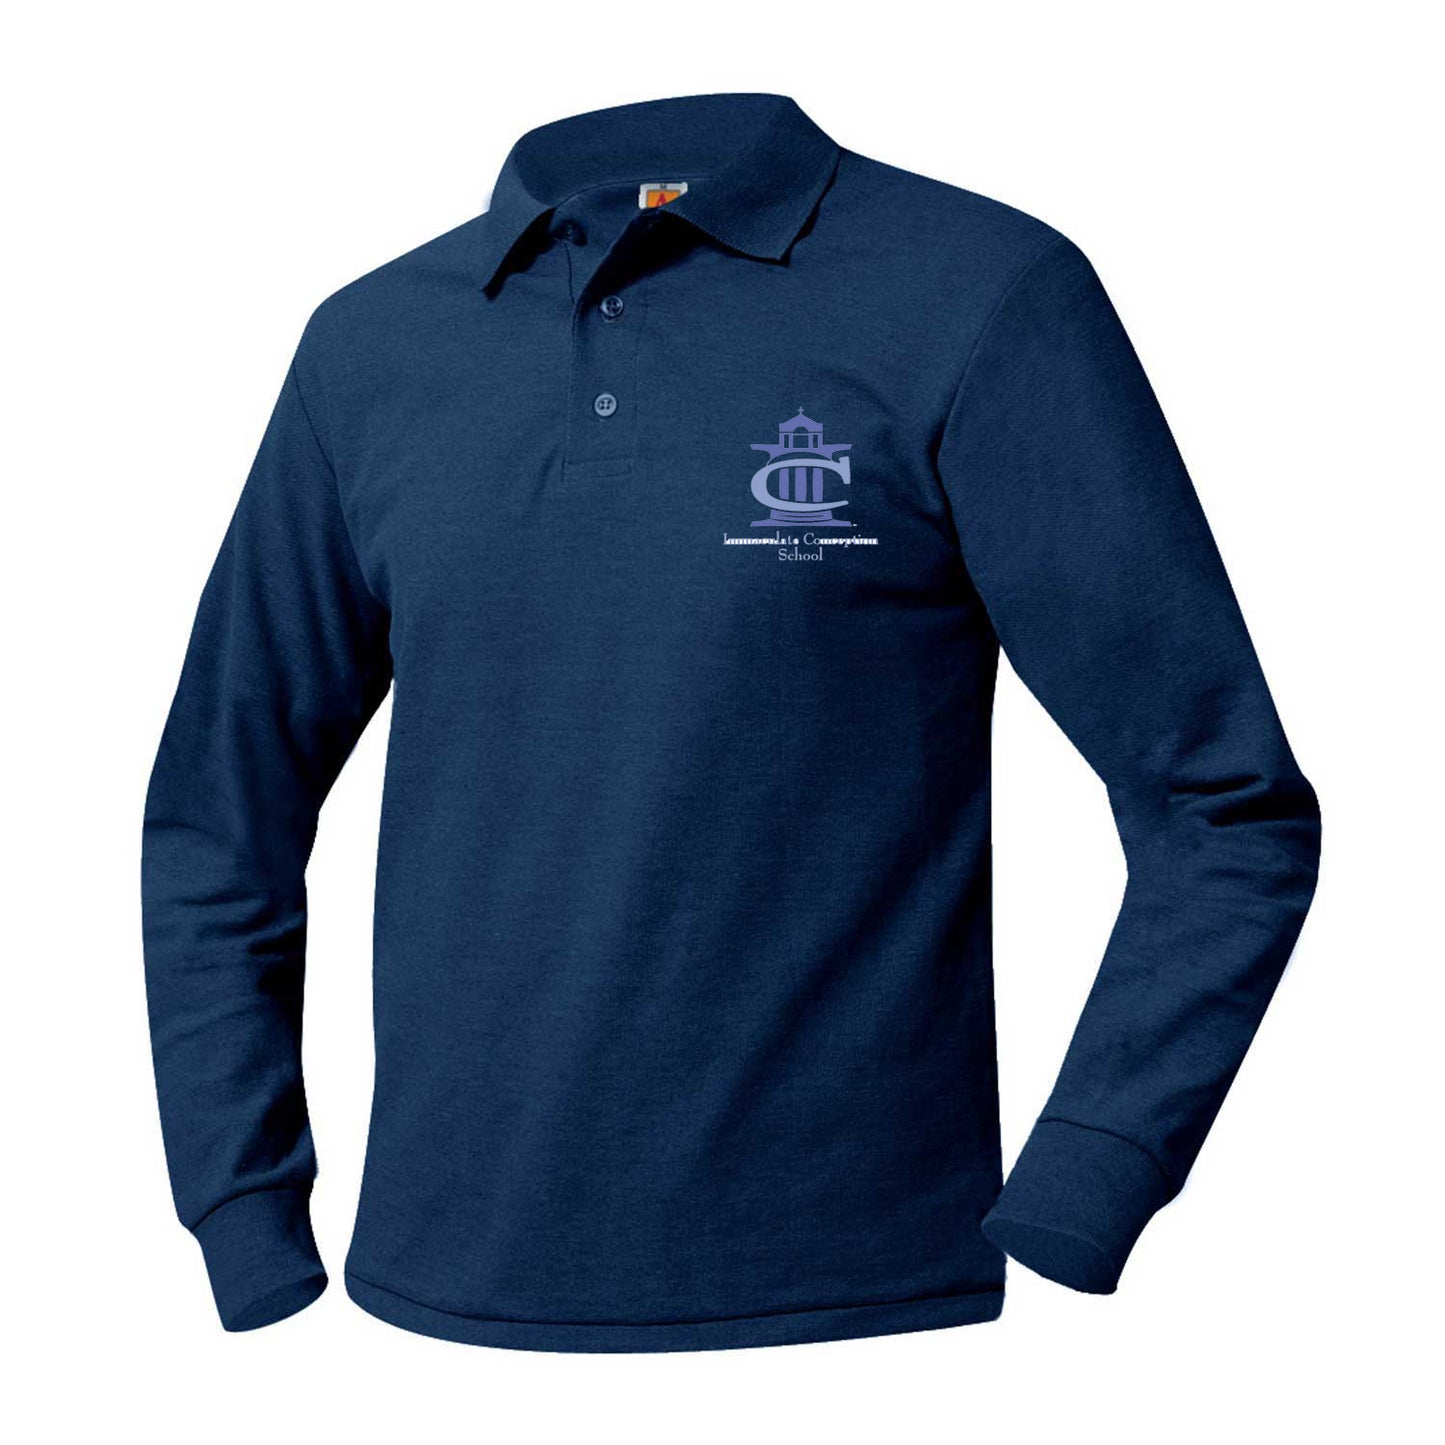 Youth Long Sleeve Pique Polo With Immaculate Conception Fort Smith Logo